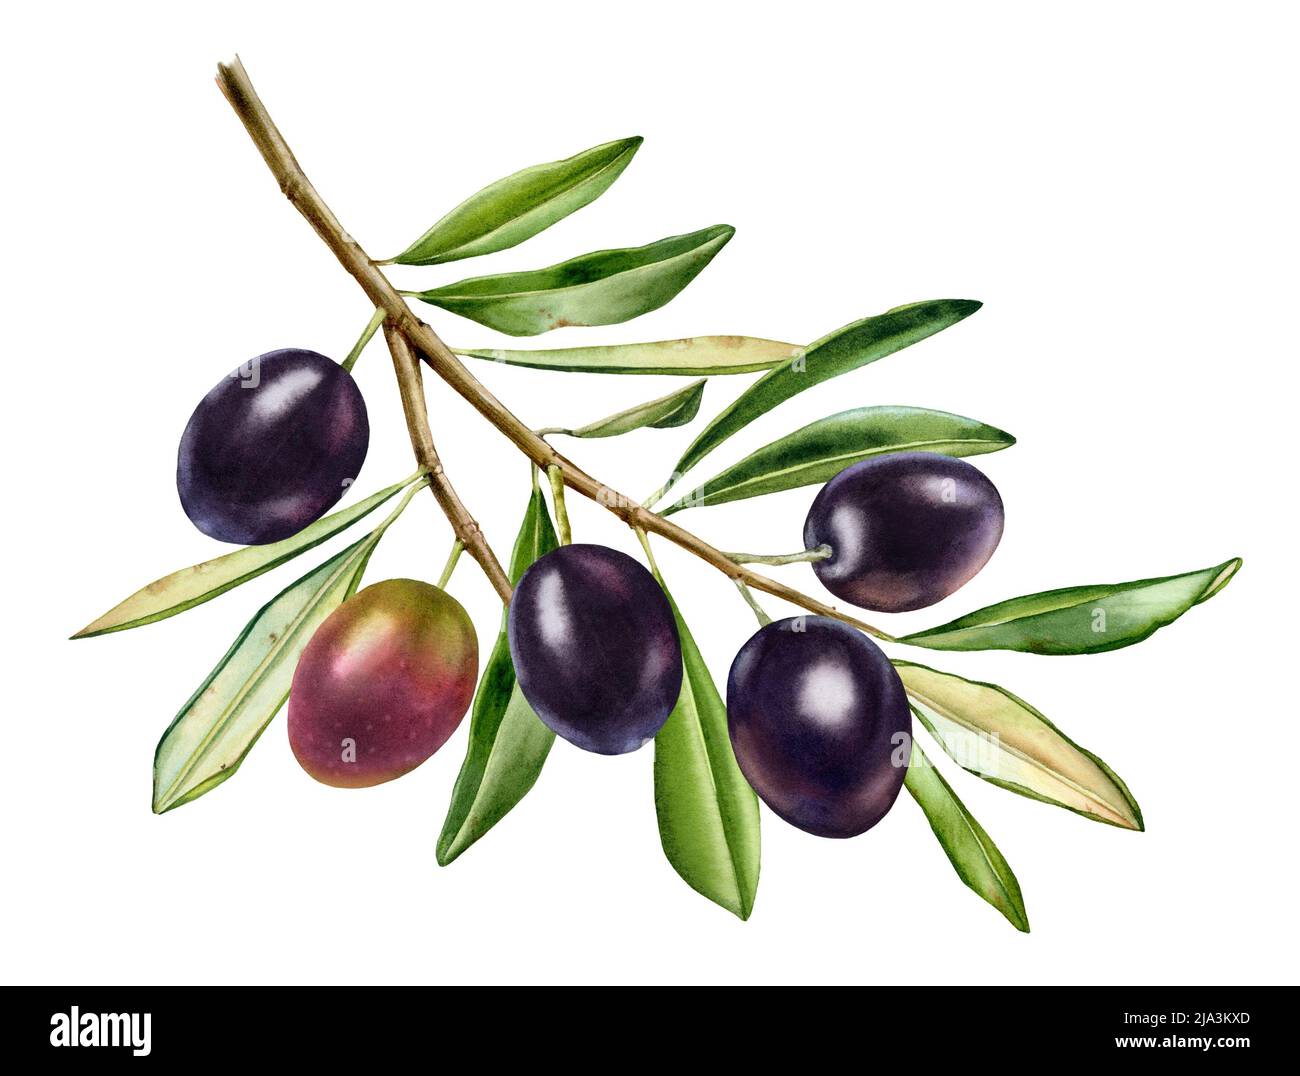 https://c8.alamy.com/comp/2JA3KXD/watercolor-black-olives-big-branch-with-shiny-fruits-with-leaves-realistic-painting-with-fresh-ripe-olives-botanical-illustration-on-white-hand-2JA3KXD.jpg